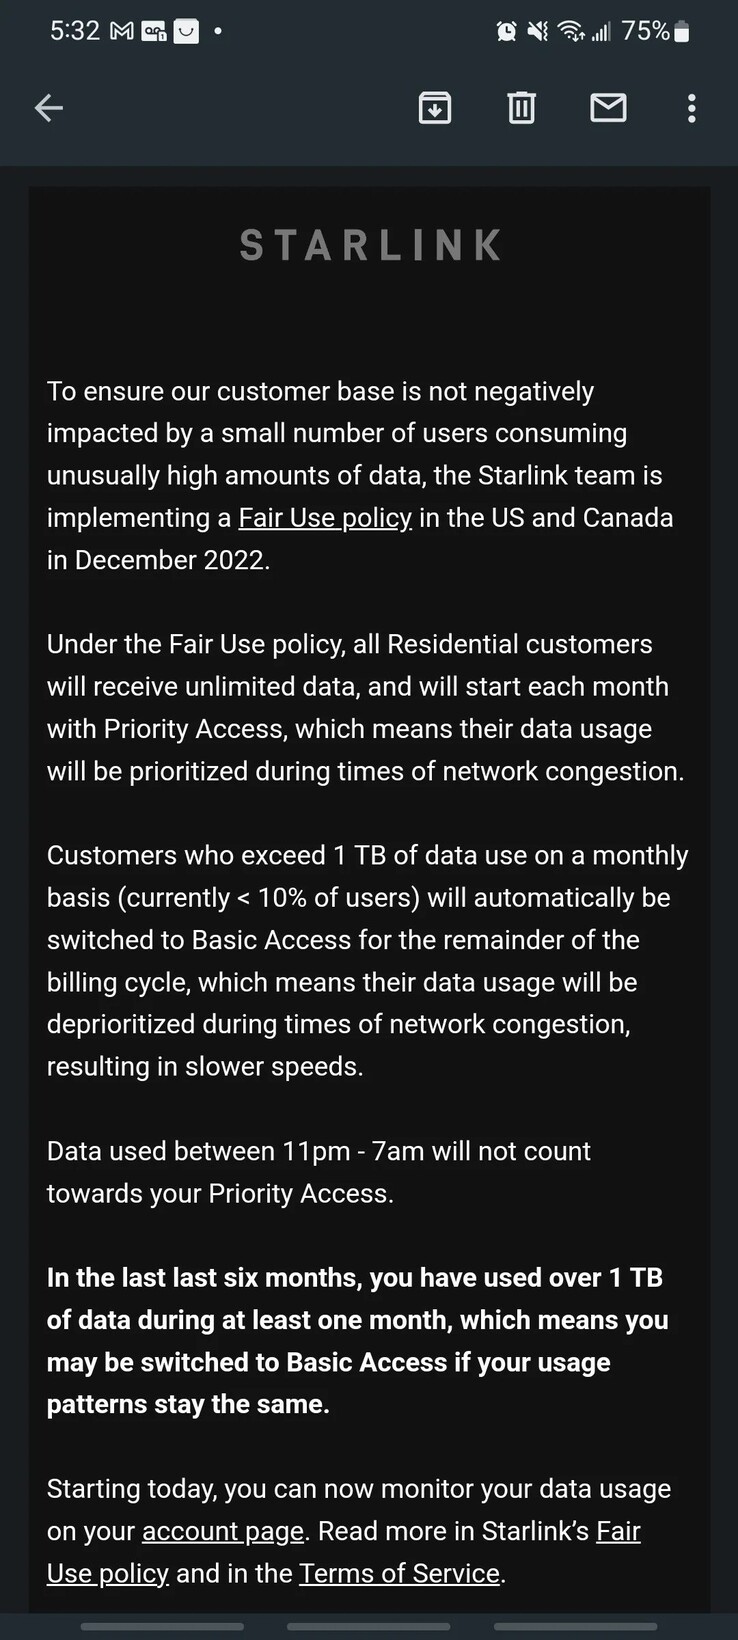 The data cap message SpaceX has been sending to Starlink users since Friday